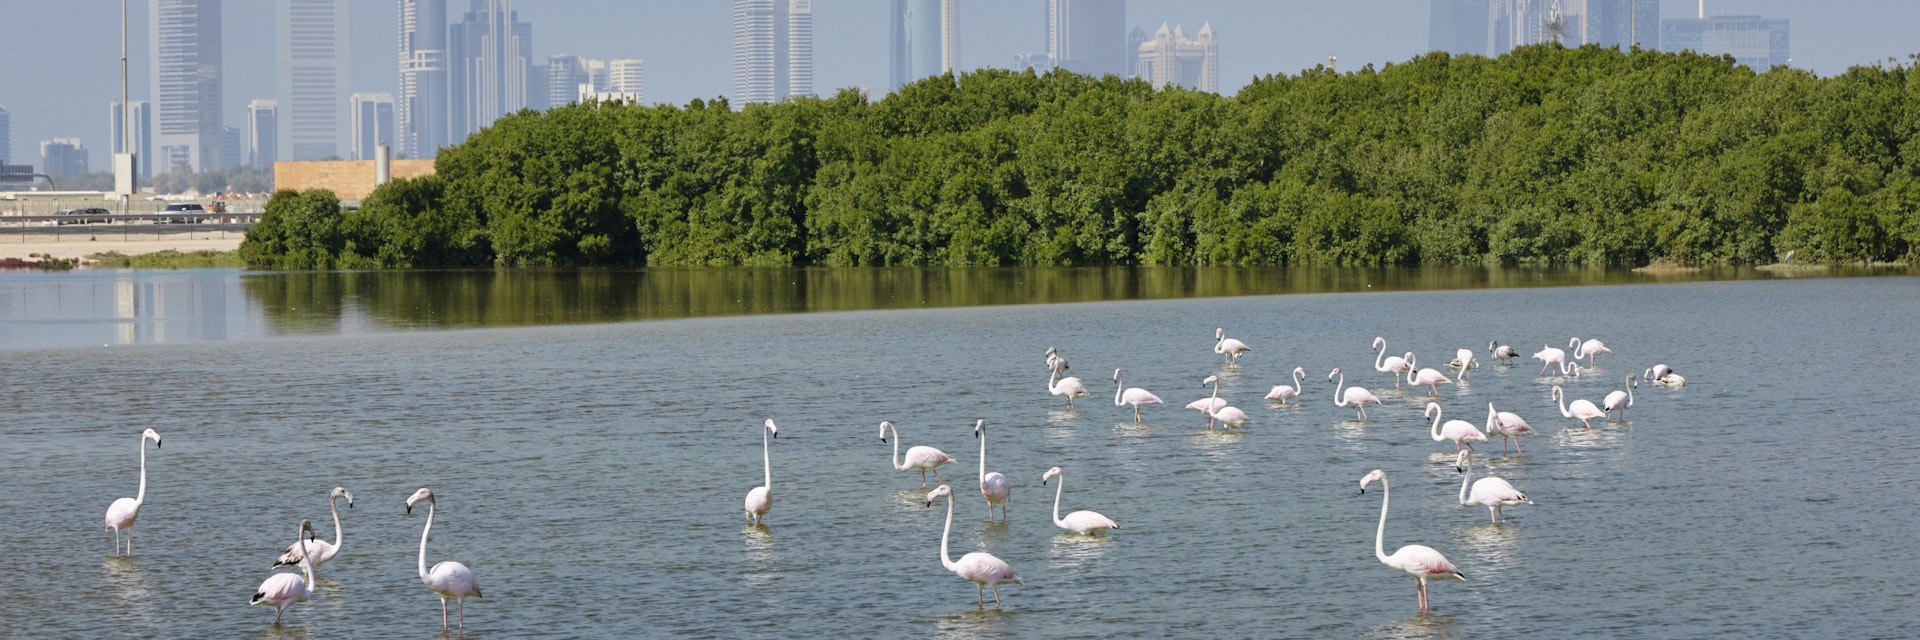 Greater flamingo's (Phoenicopterus rosens) with in the background the skyline of Dubai, United Arab Emirates; Shutterstock ID 526380268; Your name (First / Last): Lauren Keith; GL account no.: 65050; Netsuite department name: Online Editorial; Full Product or Project name including edition: Authentic Dubai Article